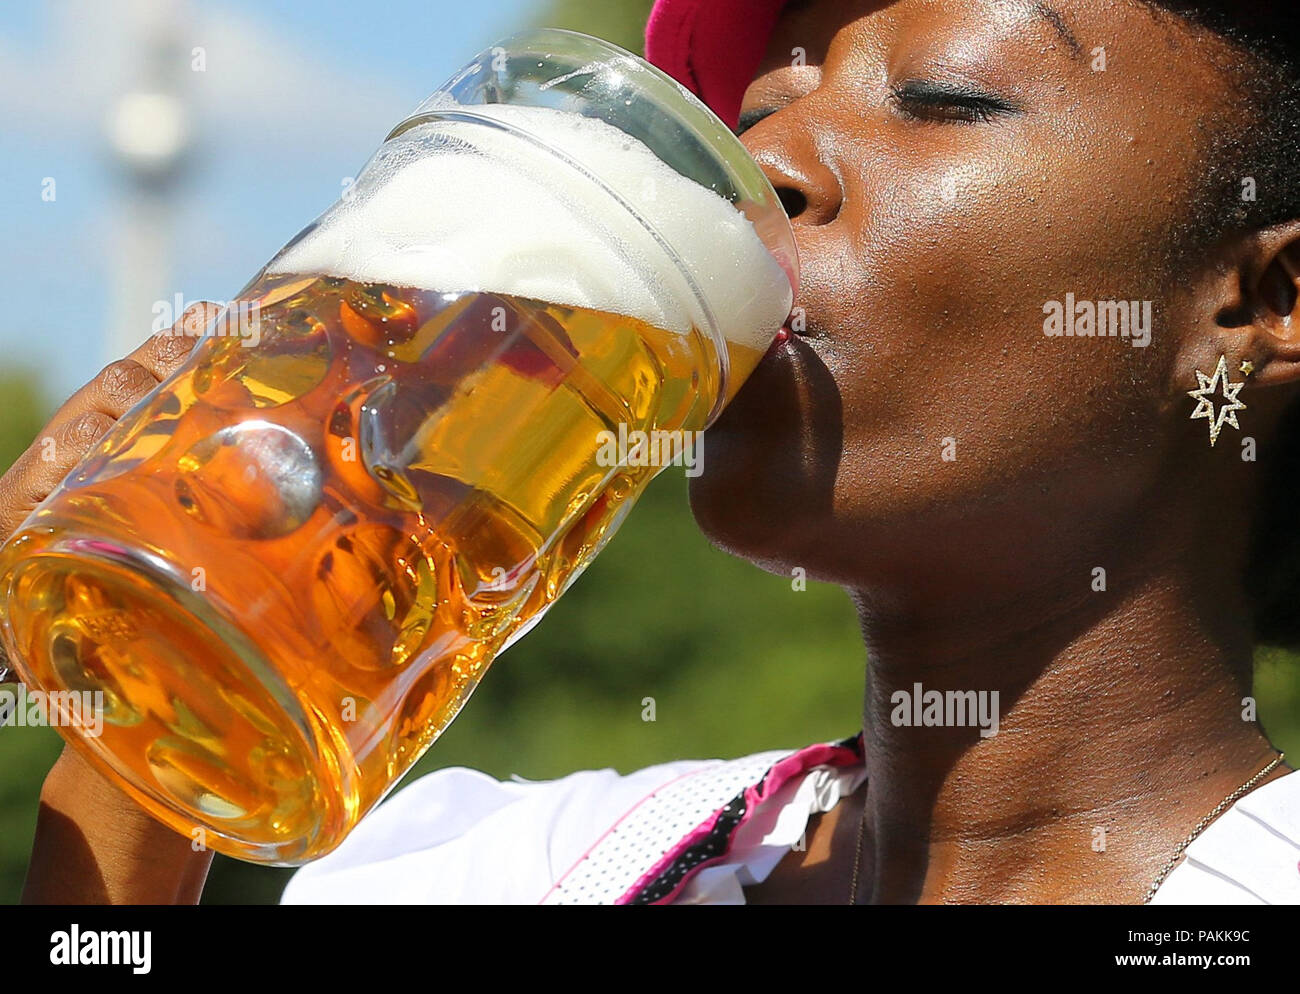 24 July 2018, Germany, Berlin: During a press event for the 22nd International Berlin Beer Festival on Karl-Marx-Allee in the Friedrichshain-Kreuzberg district, the model Ayanna tries a glass of beer. The beer festival will take place from 3 to 5 August 2018 between Frankfurter Tor and Strausberger Platz. Photo: Wolfgang Kumm/dpa Stock Photo